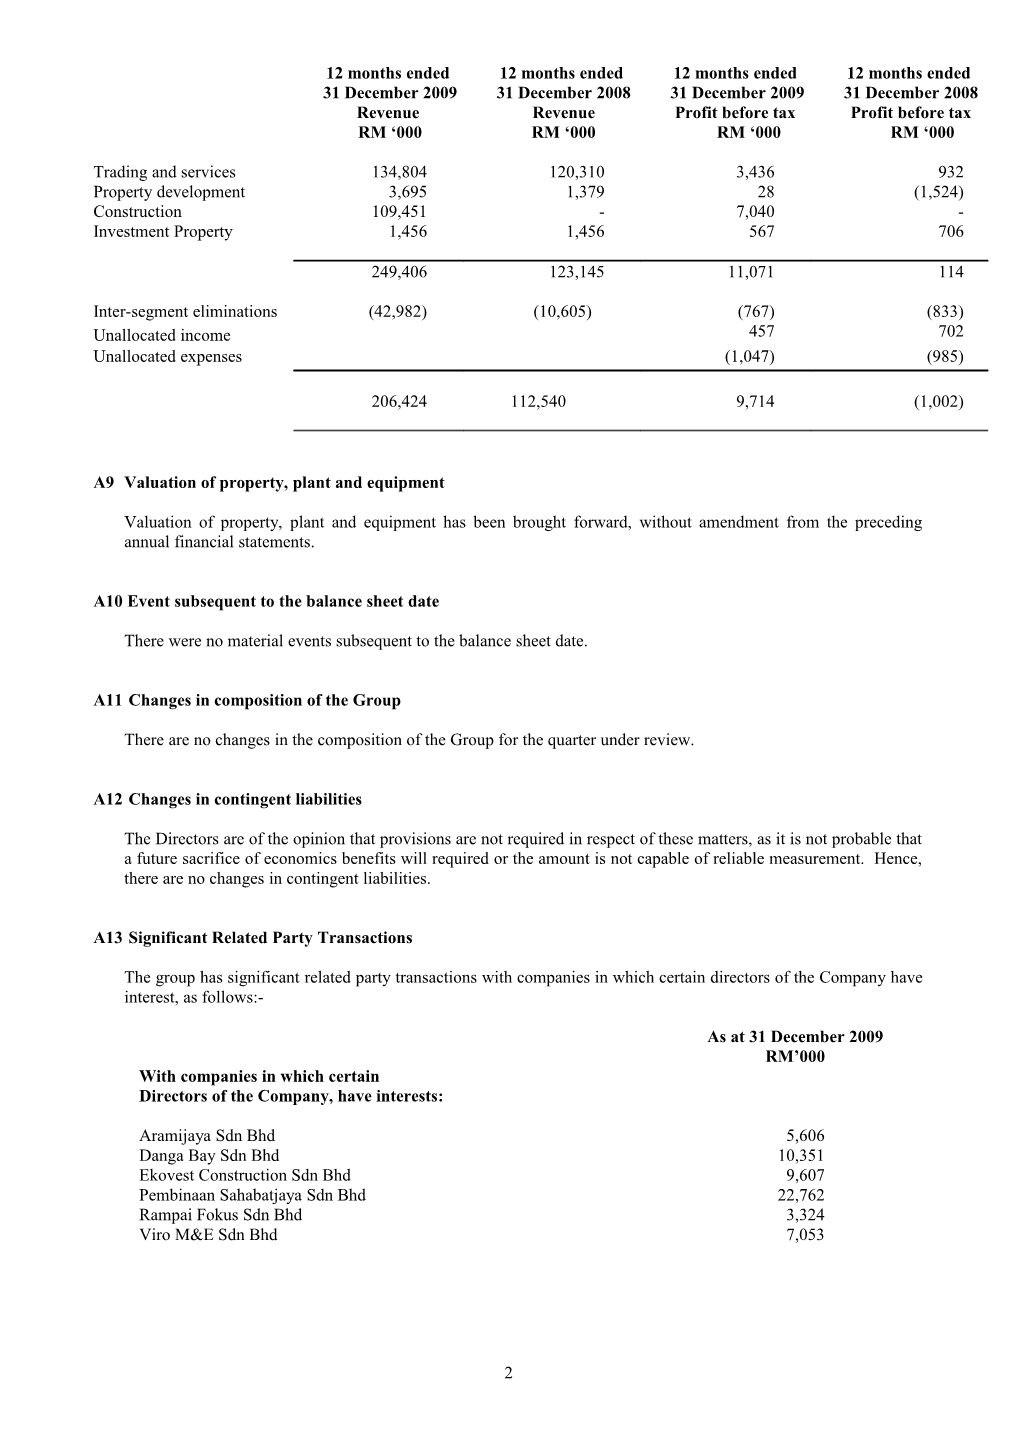 Notes to the Interim Financial Report 31December 2009